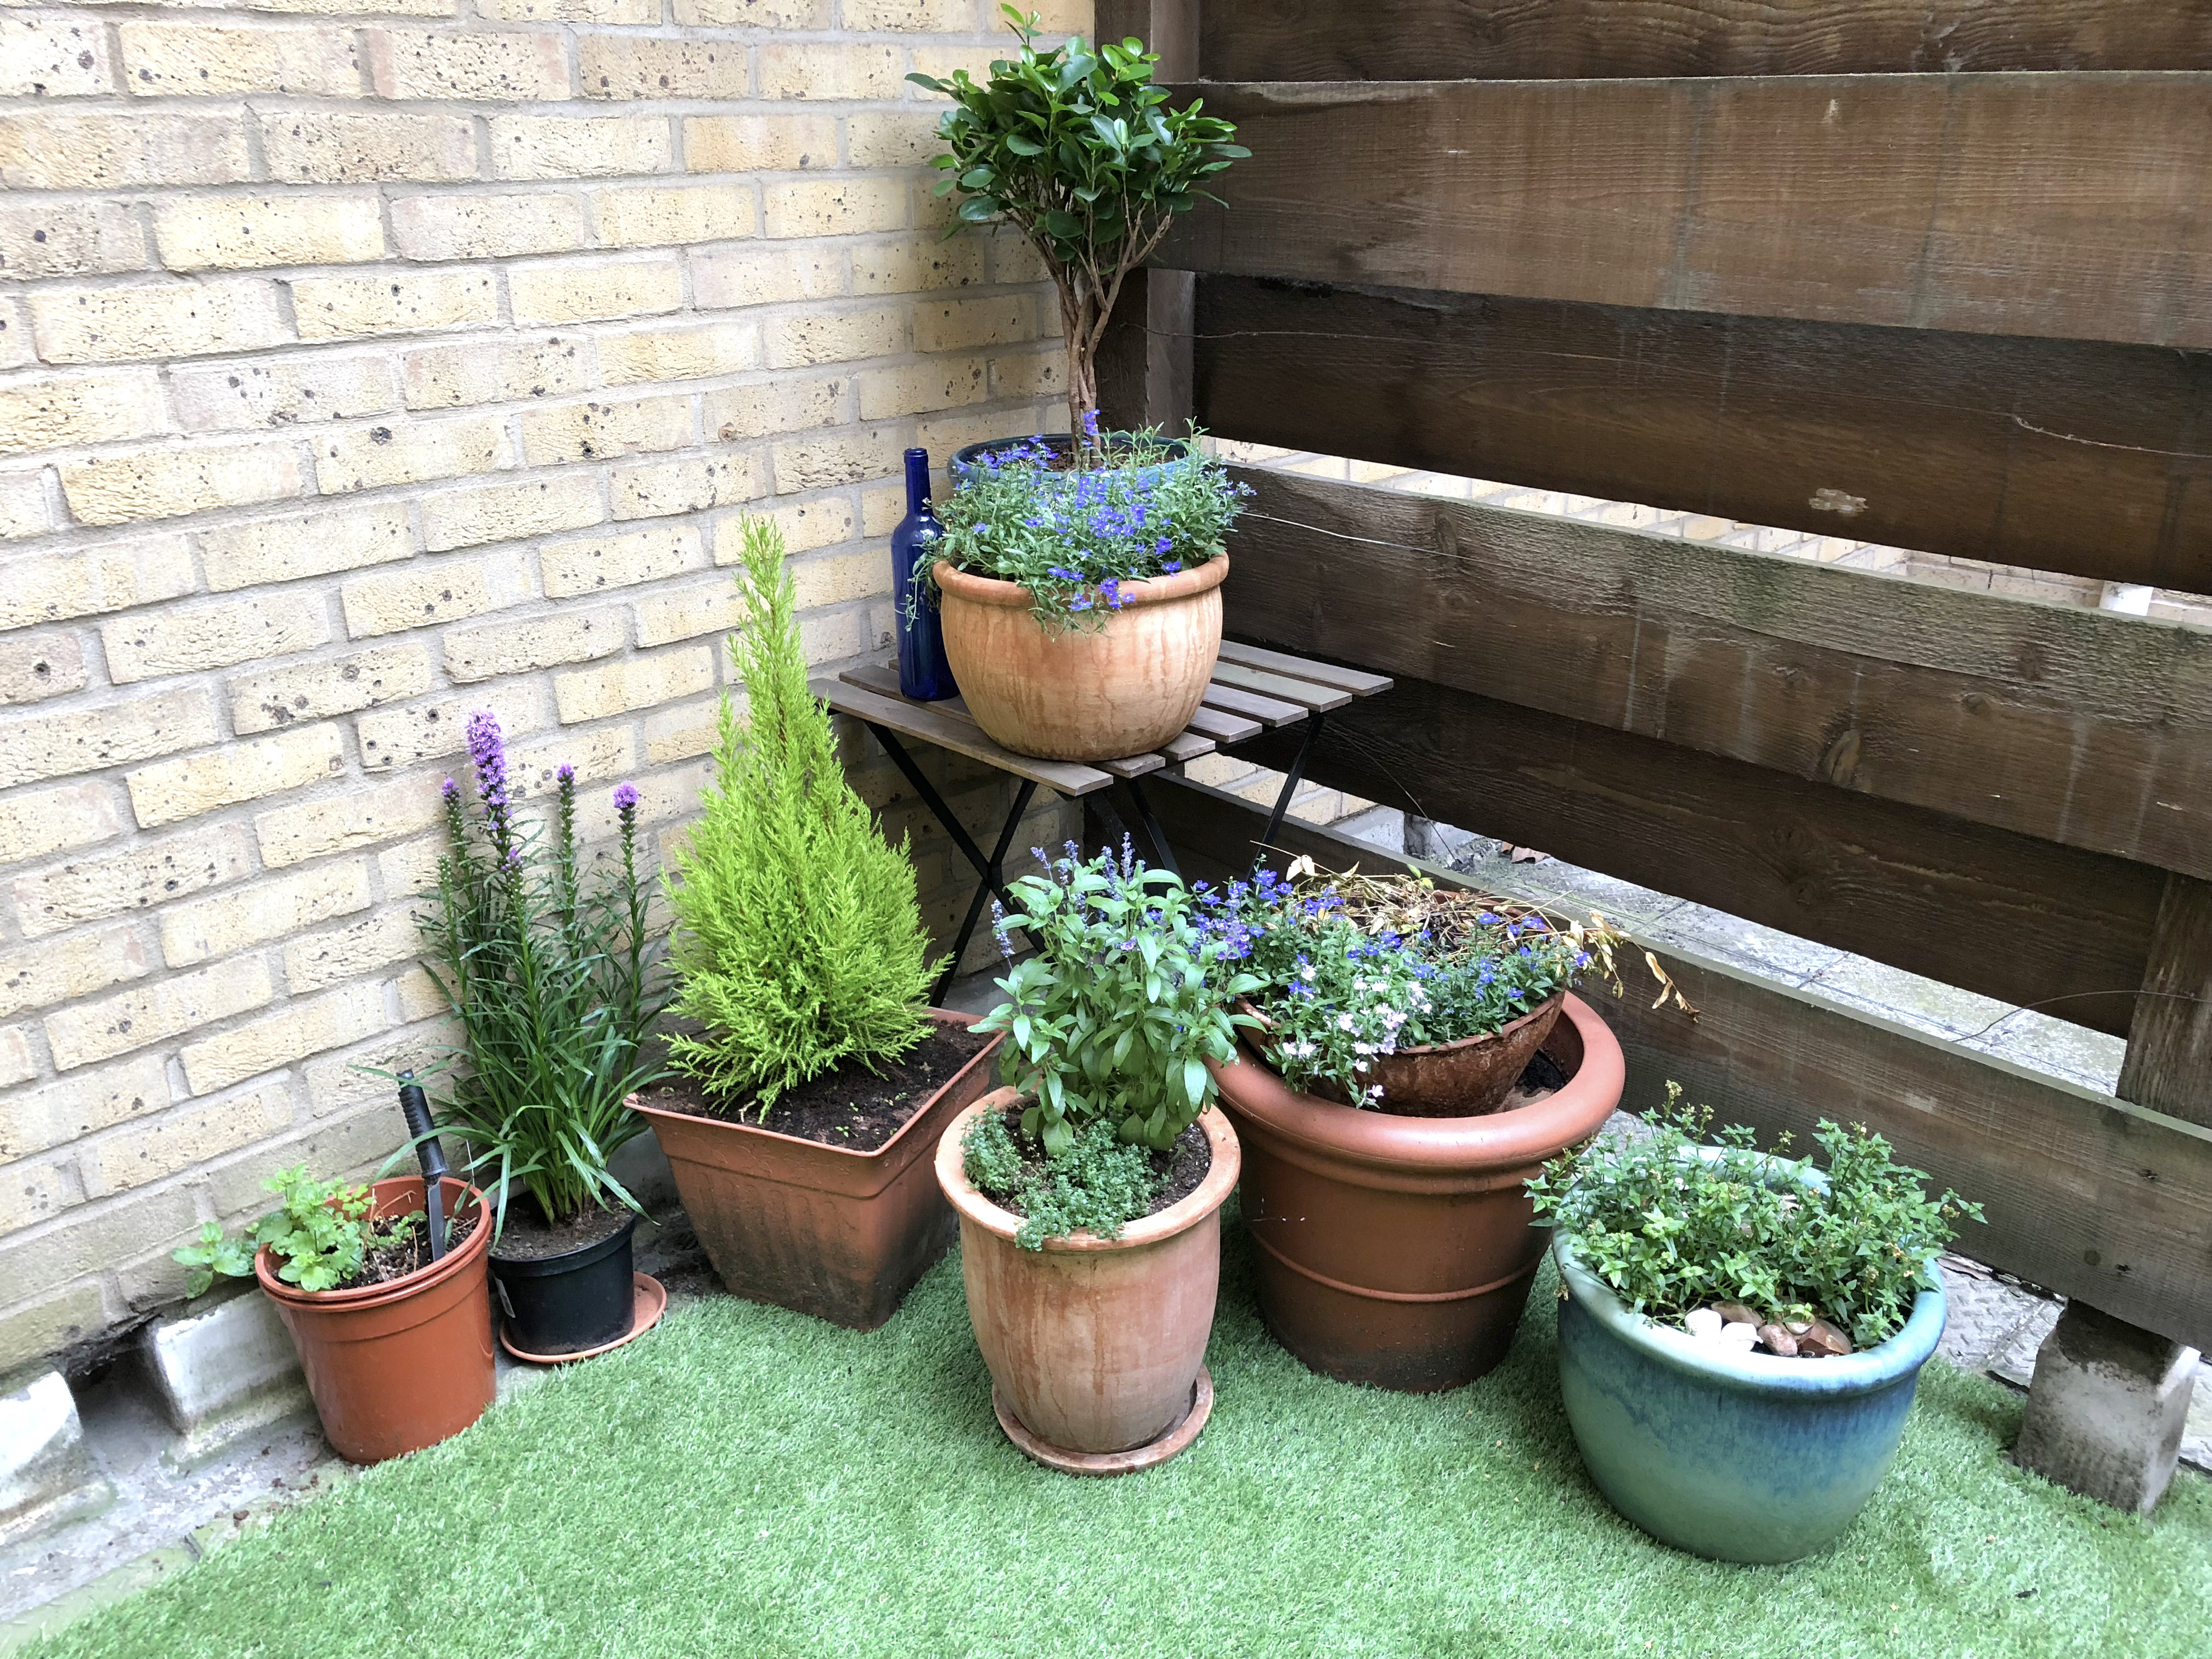 Small London garden with plant pots arranged at different heights